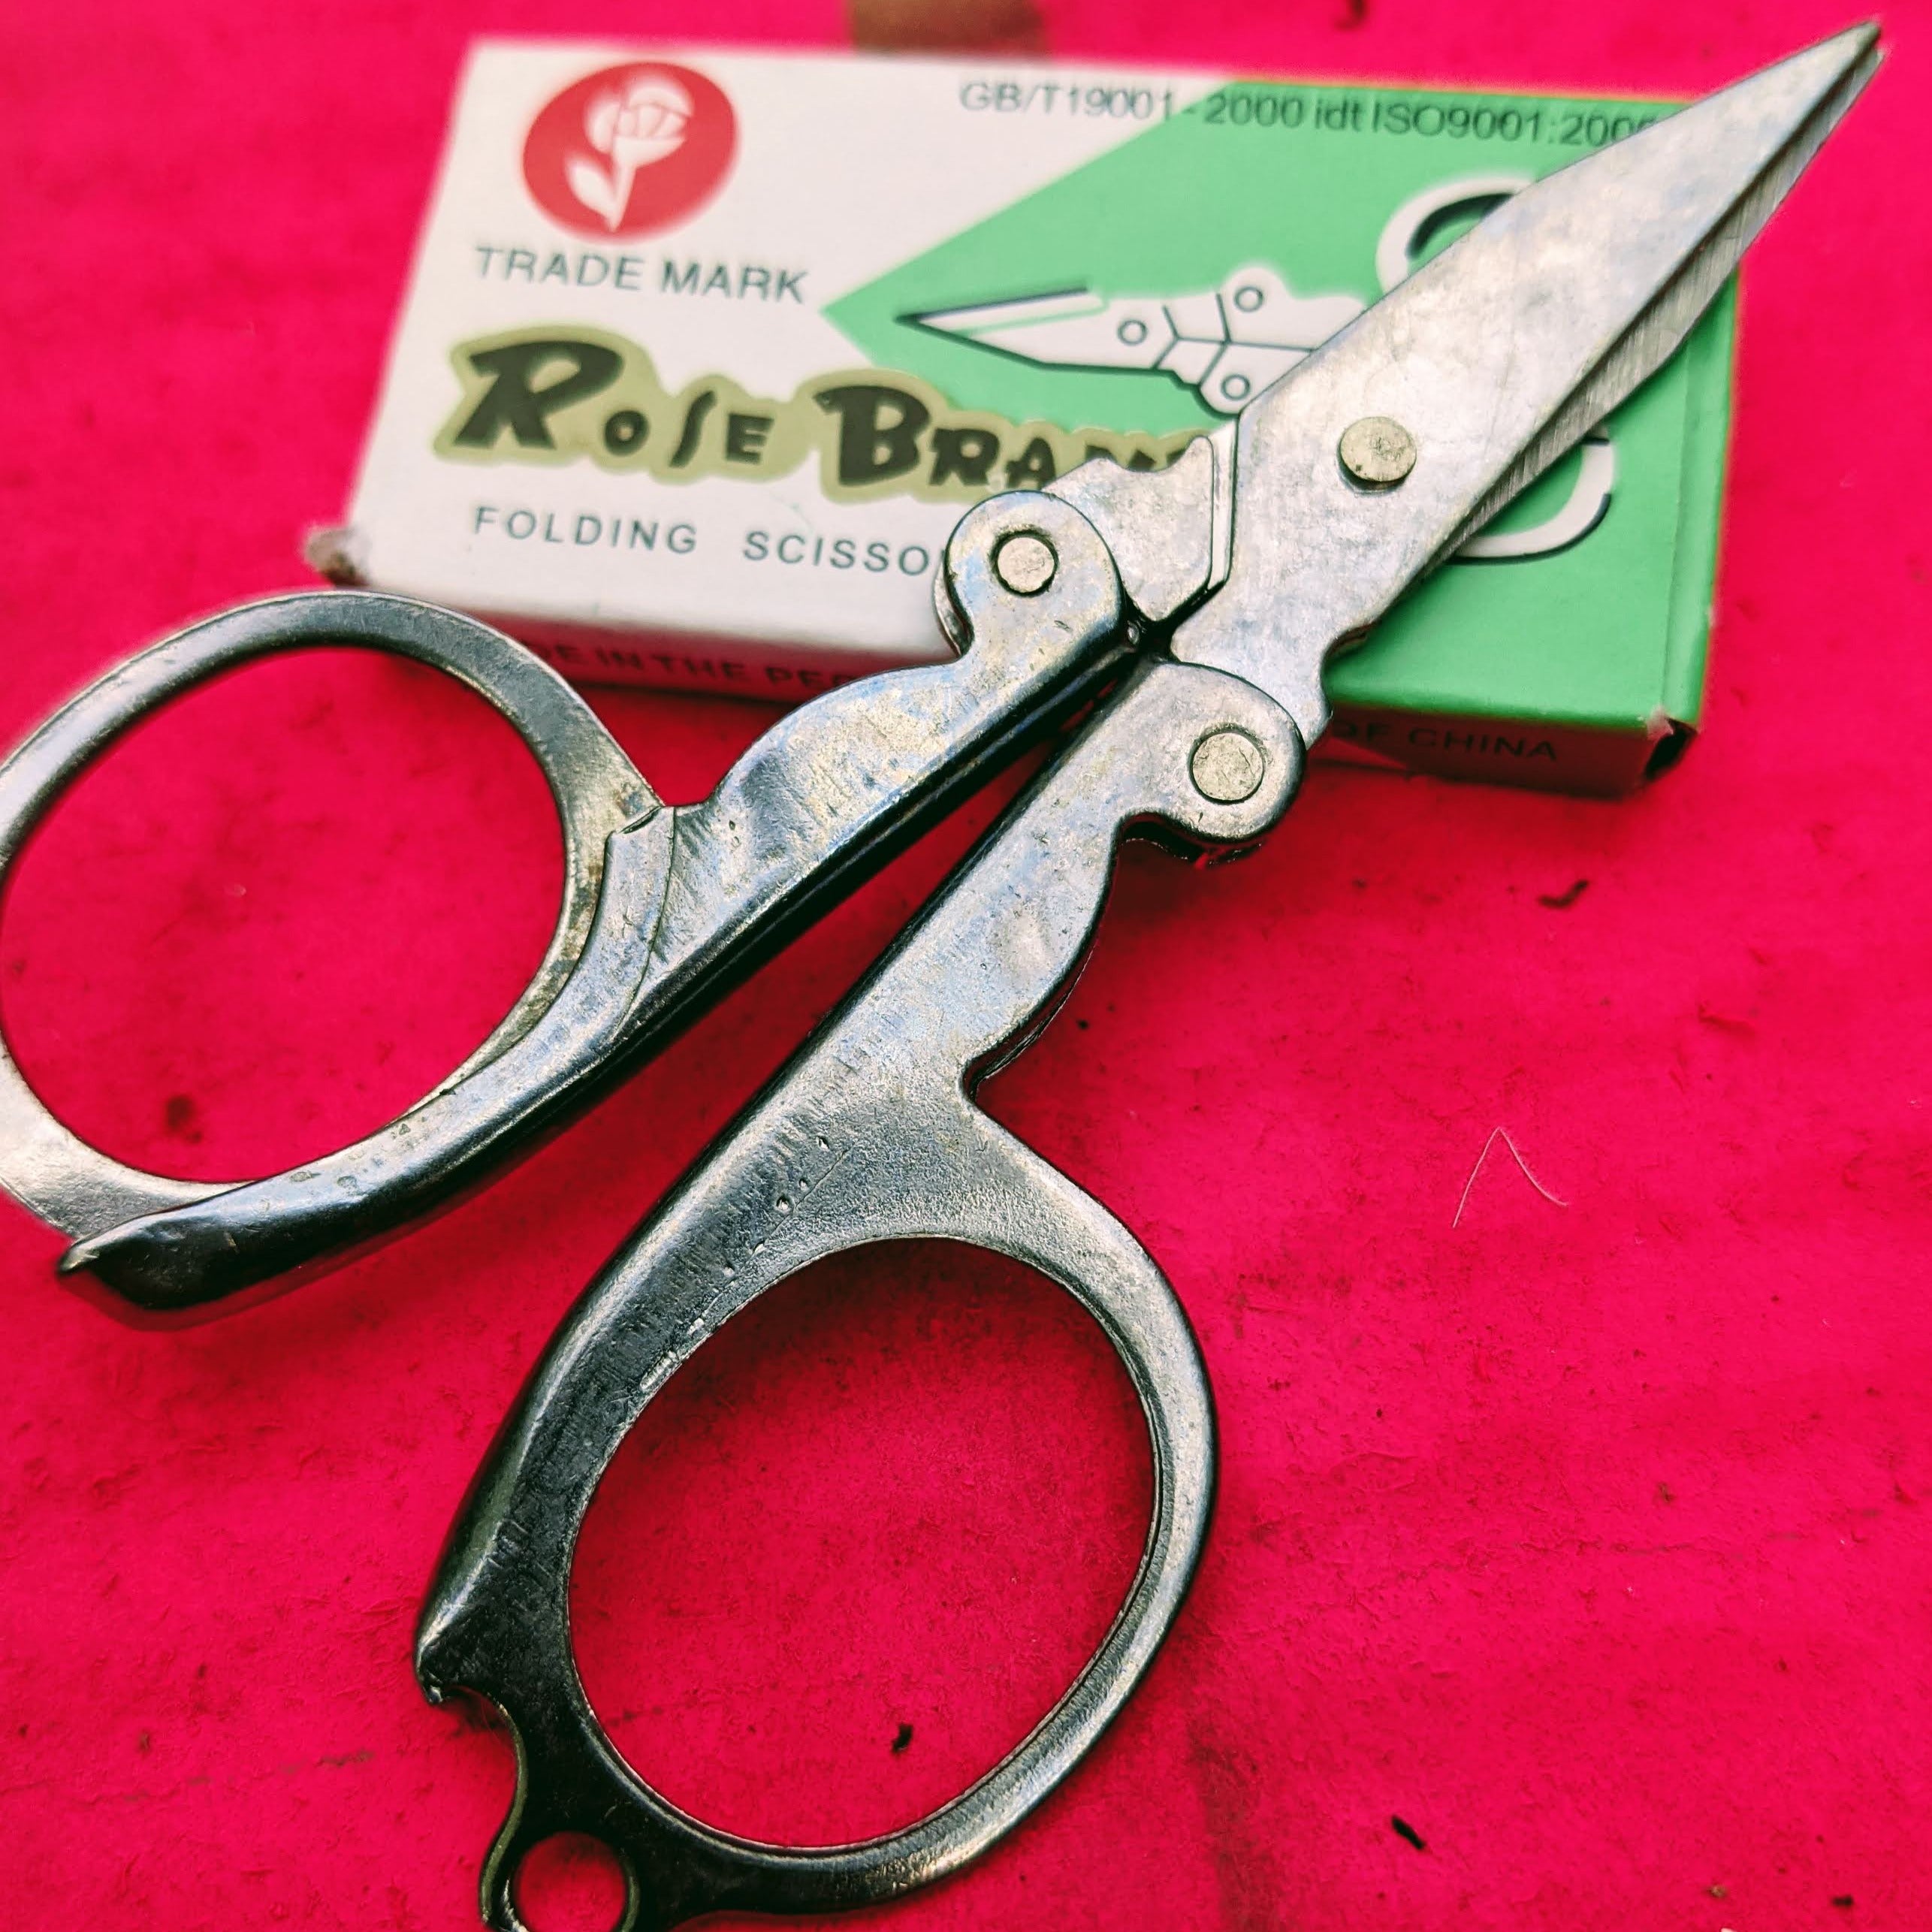 The ledgendary Rose brand scissor.  Set of 3 Stainless steel fold away indian scissors  Absolutely perfect for those christmas crackers and stocking fillers  Approx 5 x 3 cm